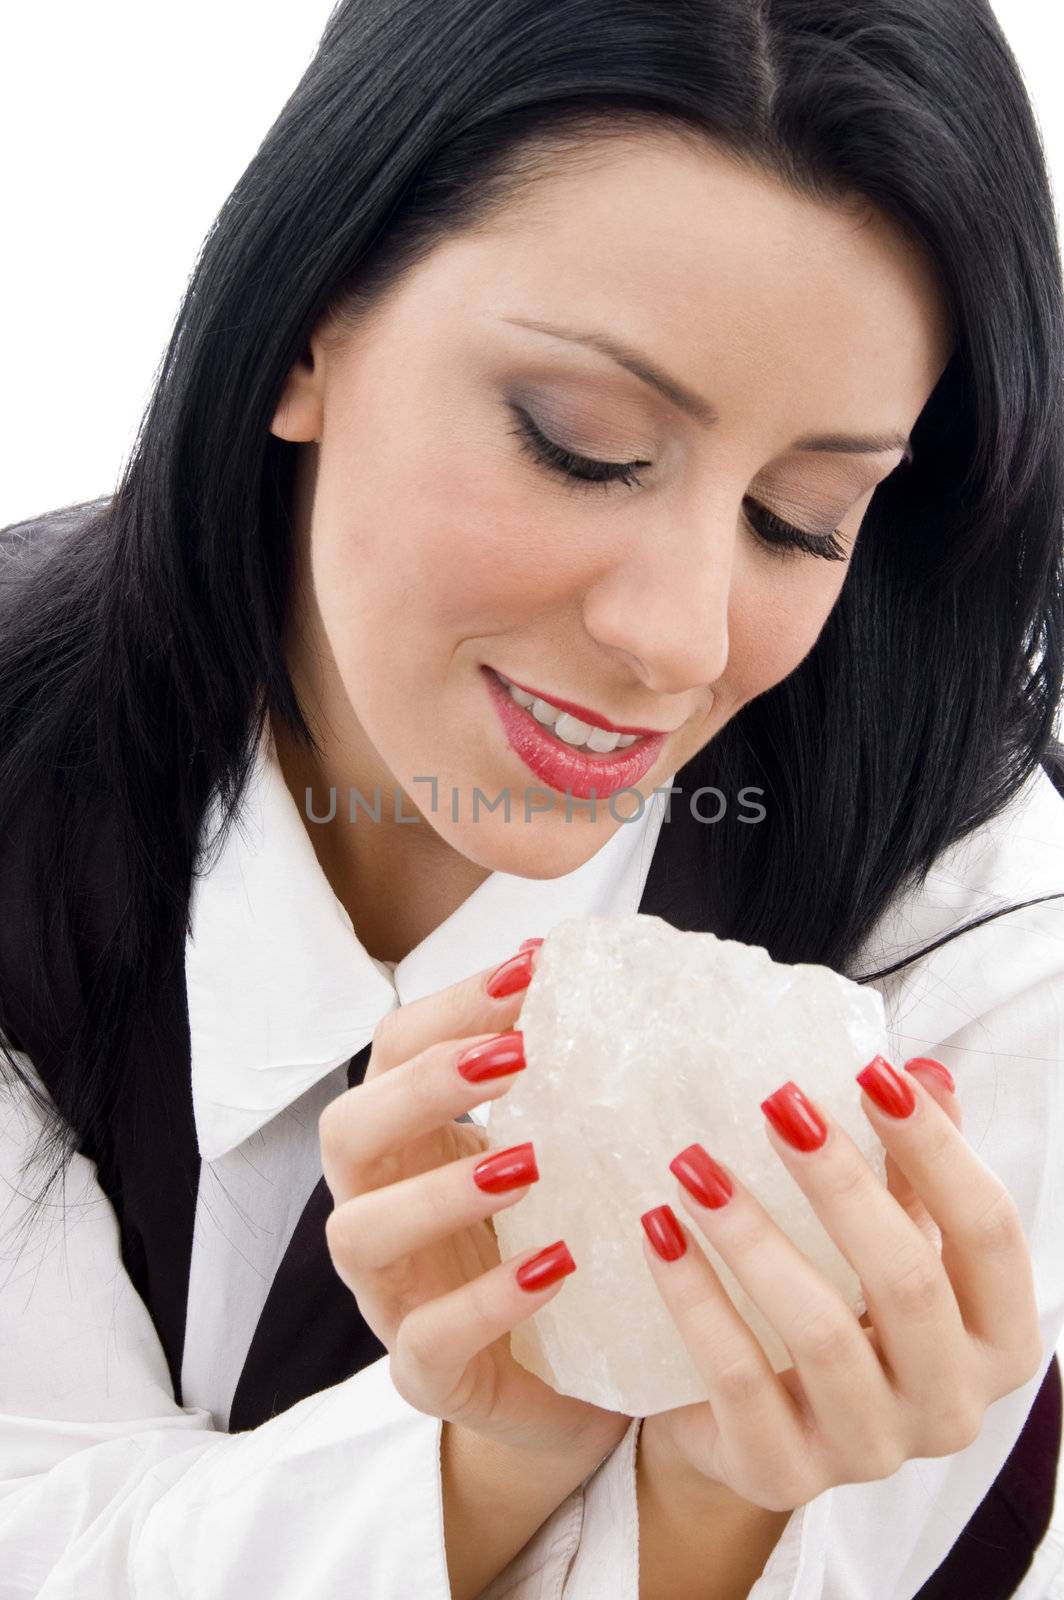 american woman holding a rock with white background